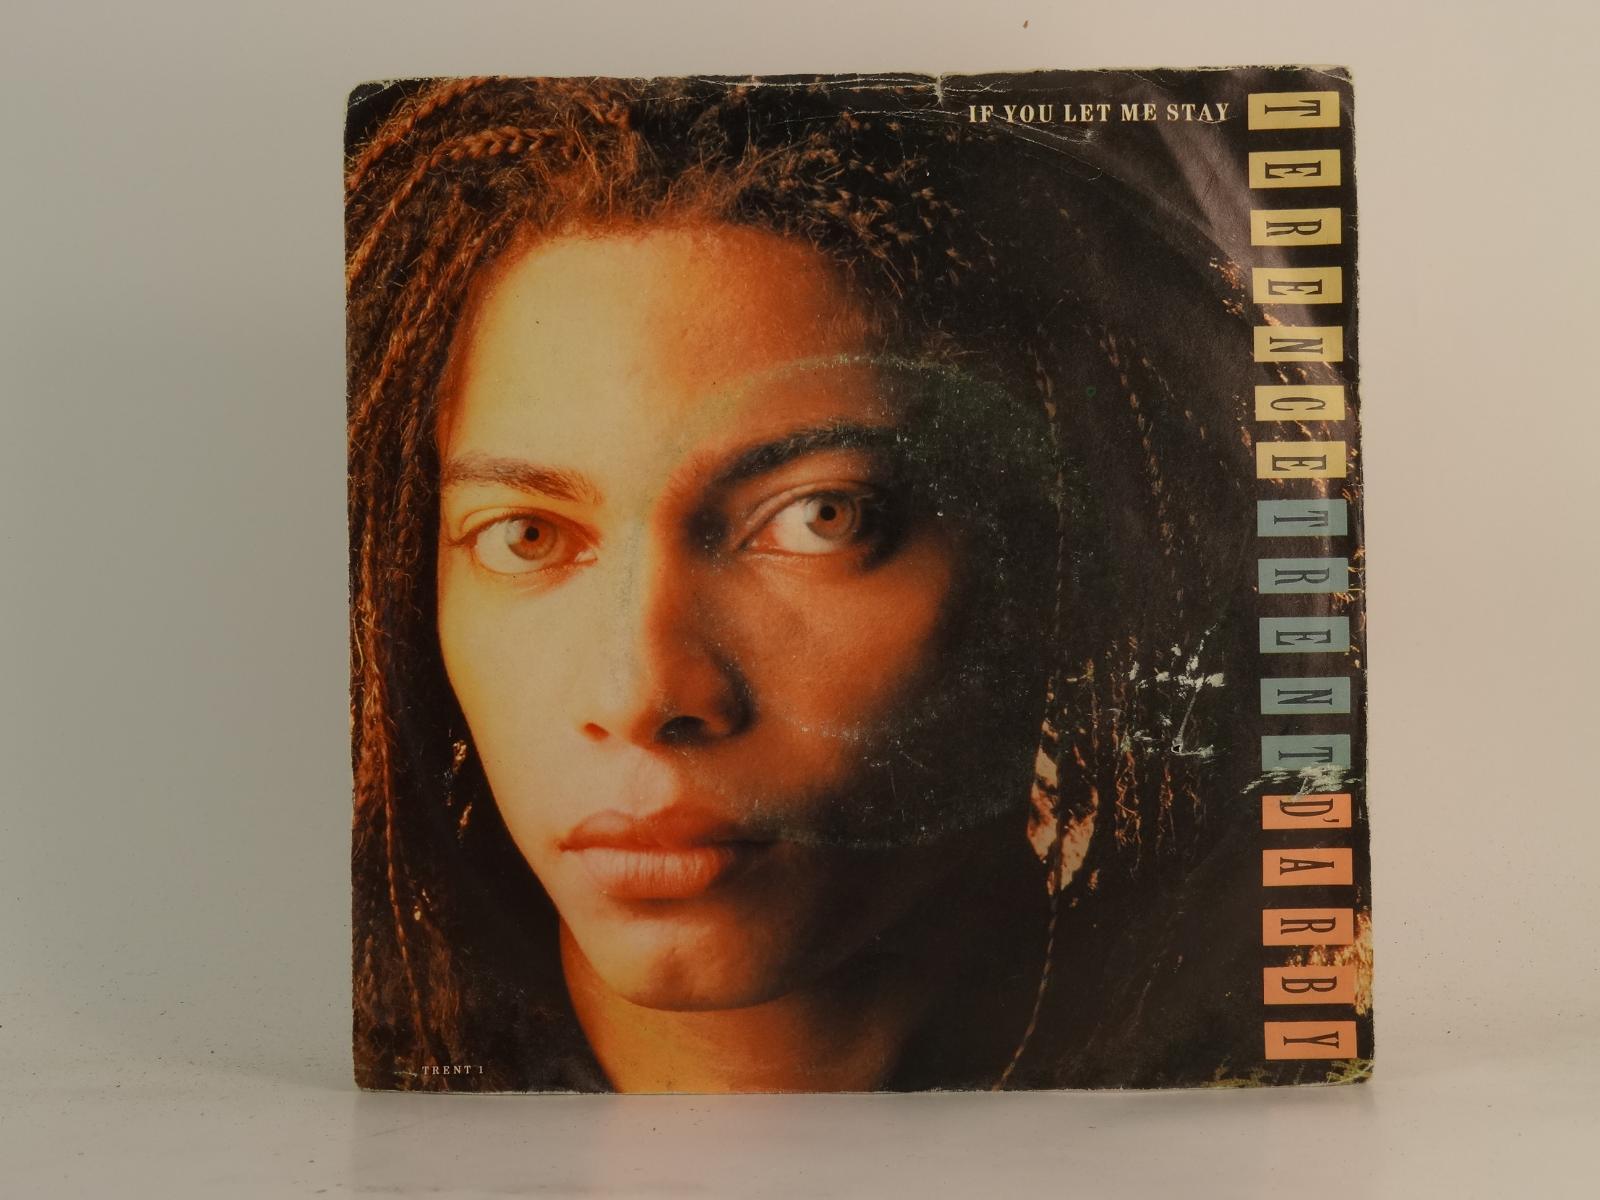 TERENCE TRENT D'ARBY, IF YOU LET ME STAY, 72, VG/EX, 2 Track, 7